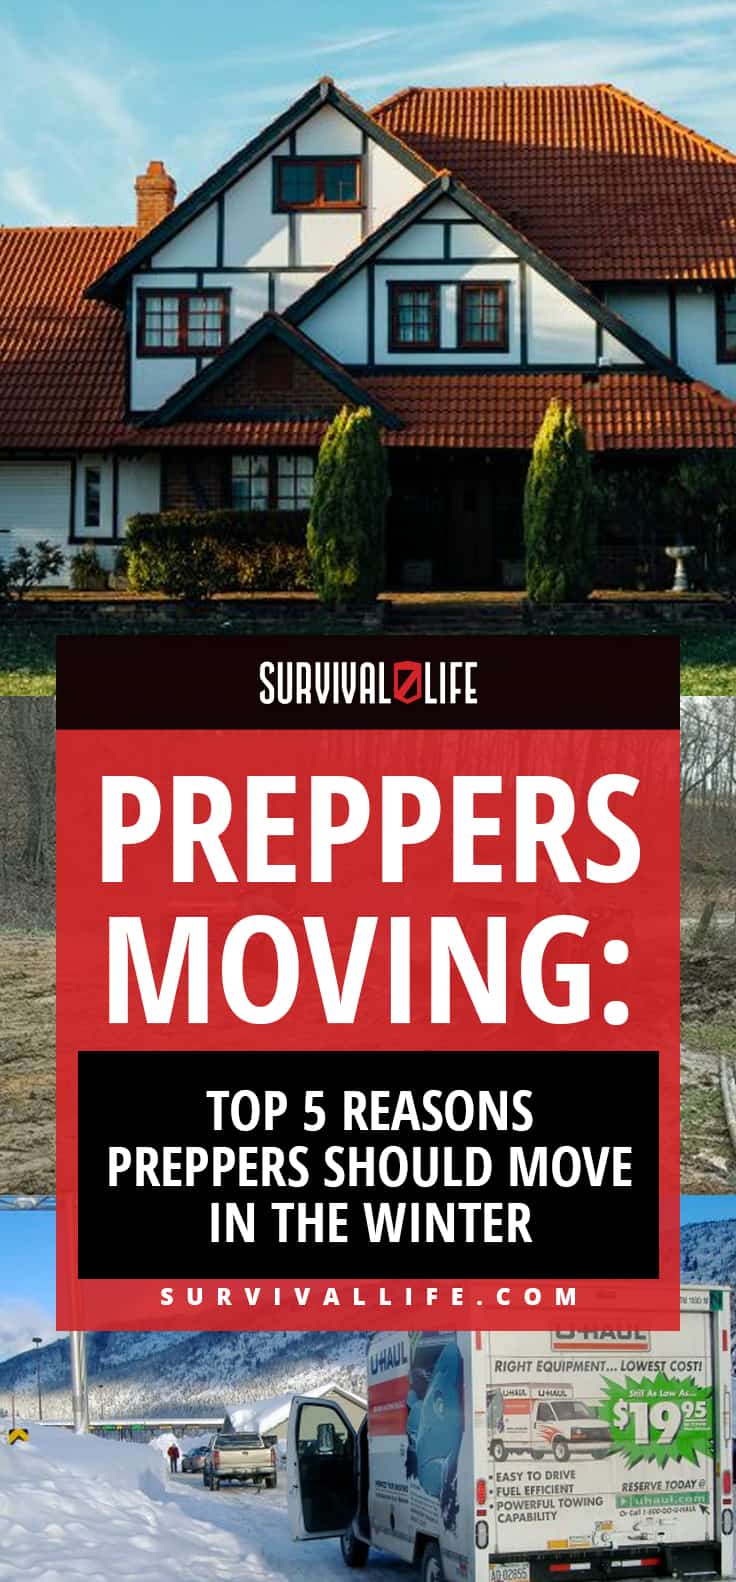 Preppers Moving: Top 5 Reasons Preppers Should Move In The Winter